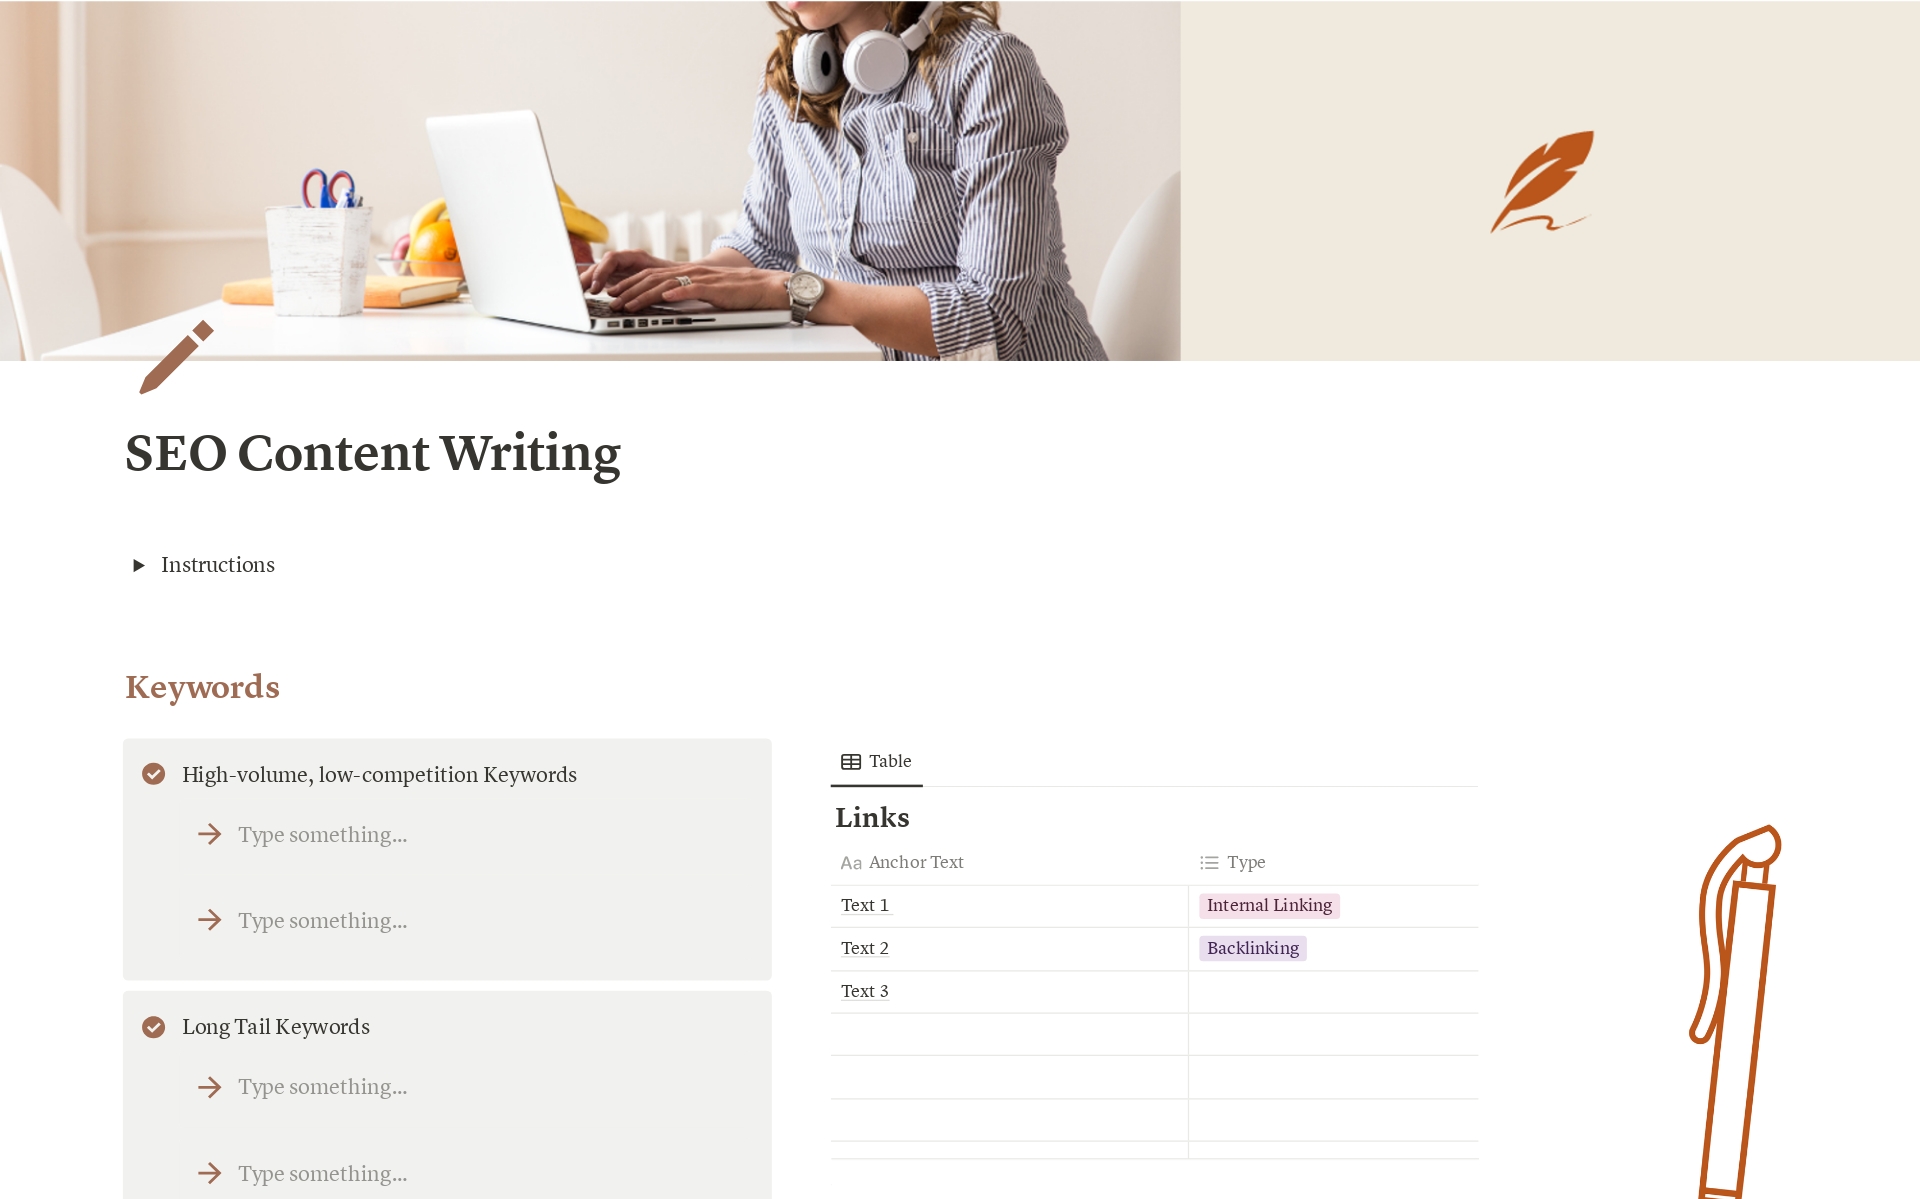 Perfect for writers, marketers, and bloggers, this template provides a structured framework to create optimized content that ranks higher in search engine results.